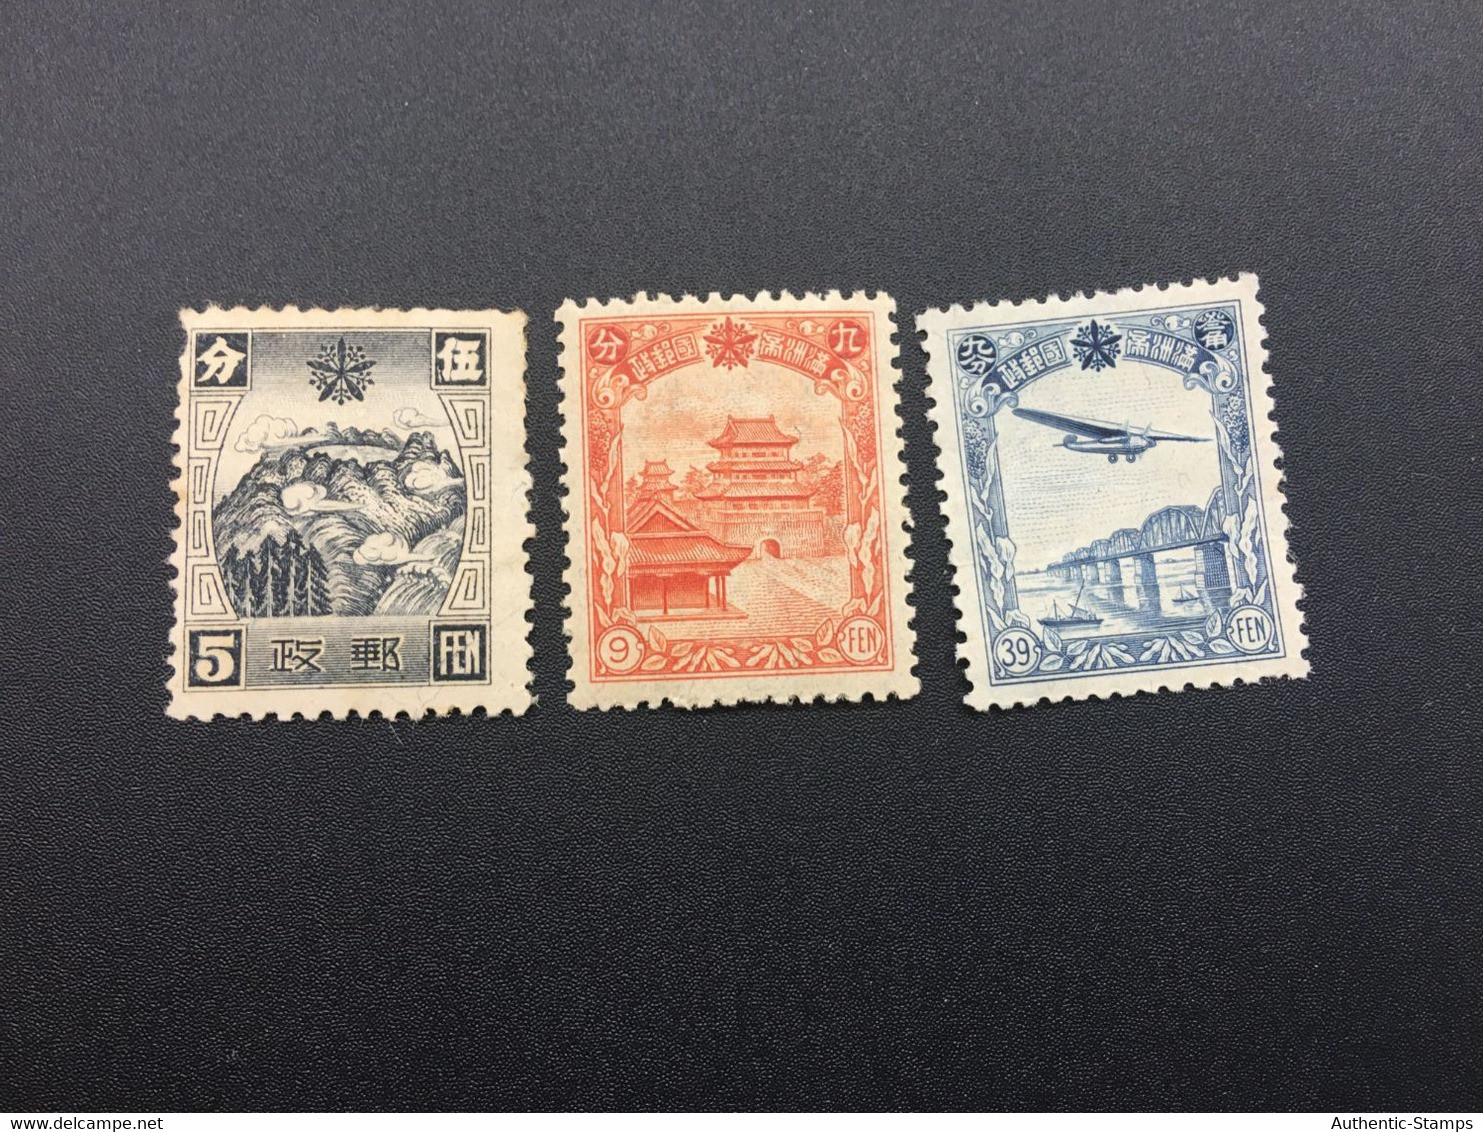 CHINA STAMP,  TIMBRO, STEMPEL,  CINA, CHINE, LIST 8275 - 1932-45 Mandchourie (Mandchoukouo)